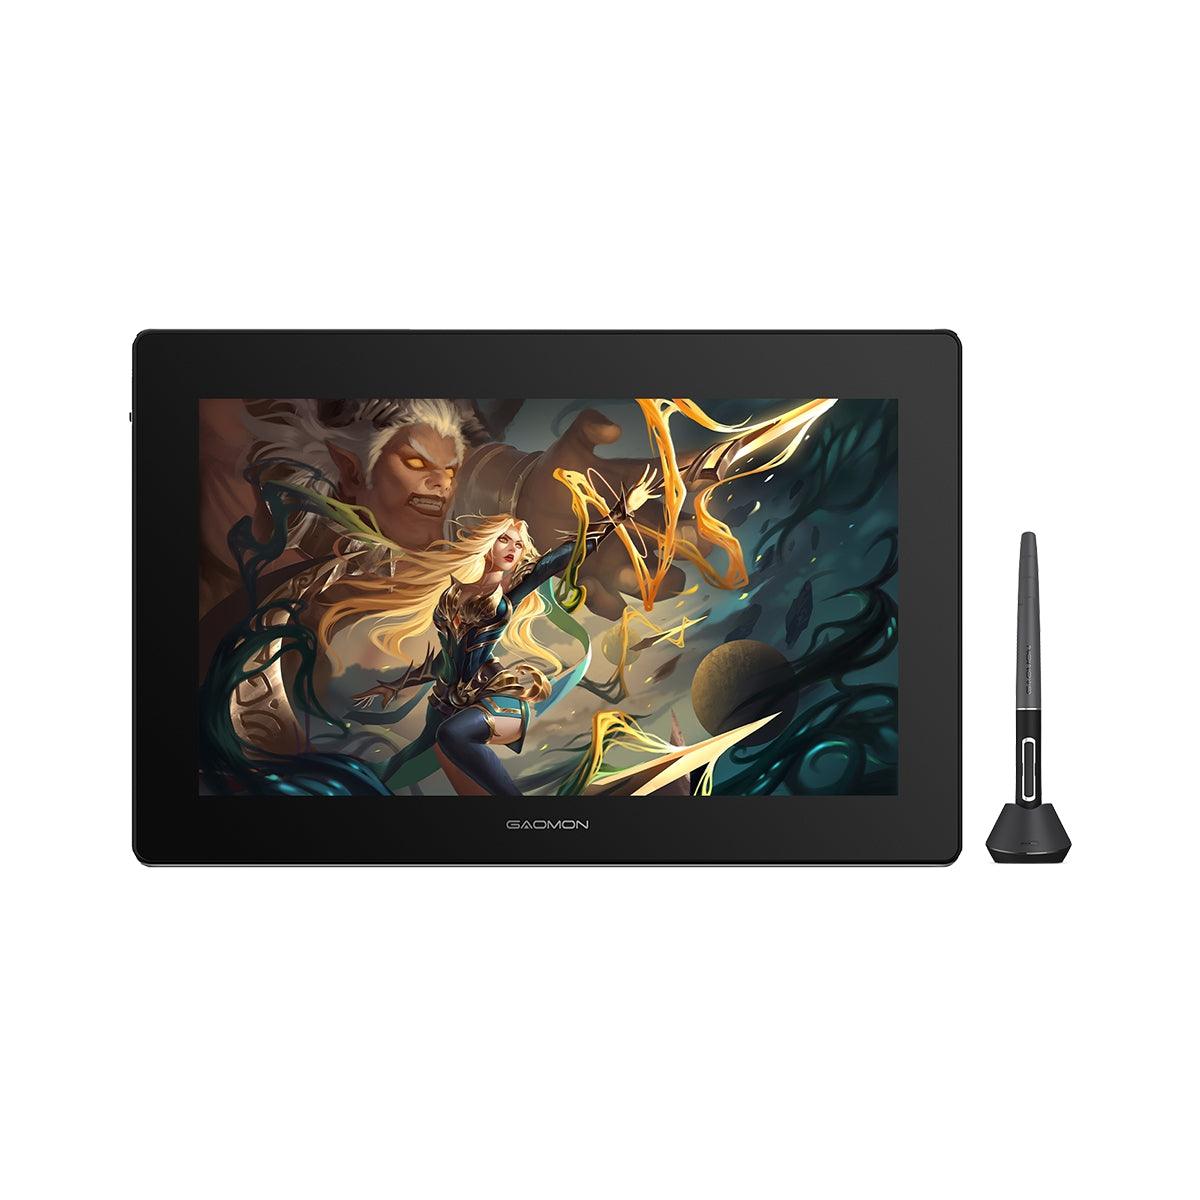 GAOMON PD1621 15.6'' 4K UHD Pen Display with 10-finger Touch Support